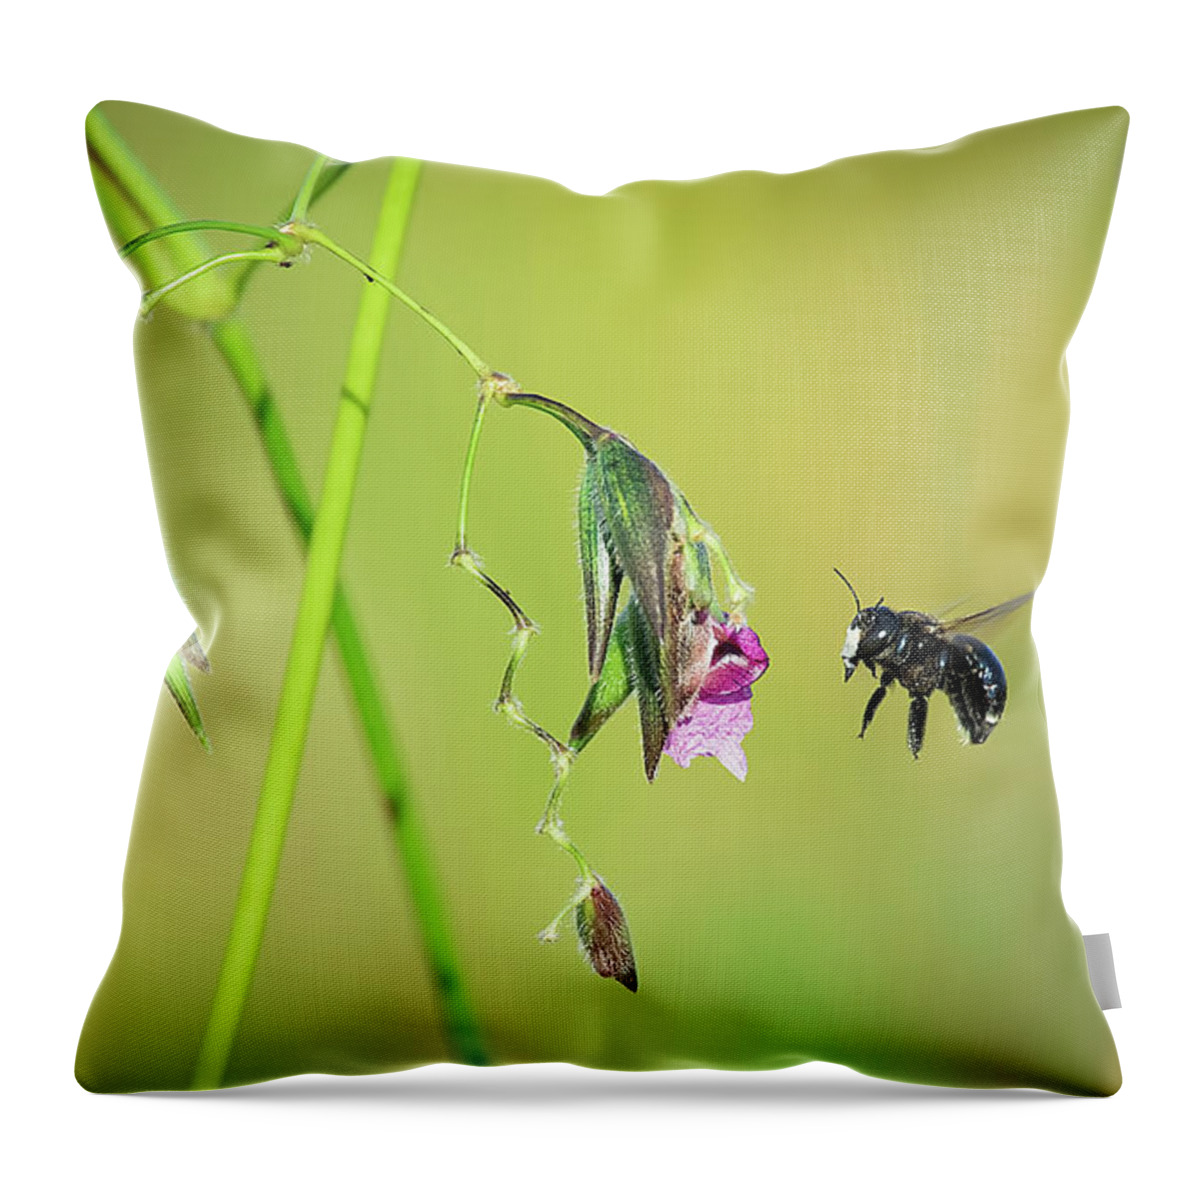 White Throw Pillow featuring the photograph White-Faced Bee by Richard Goldman